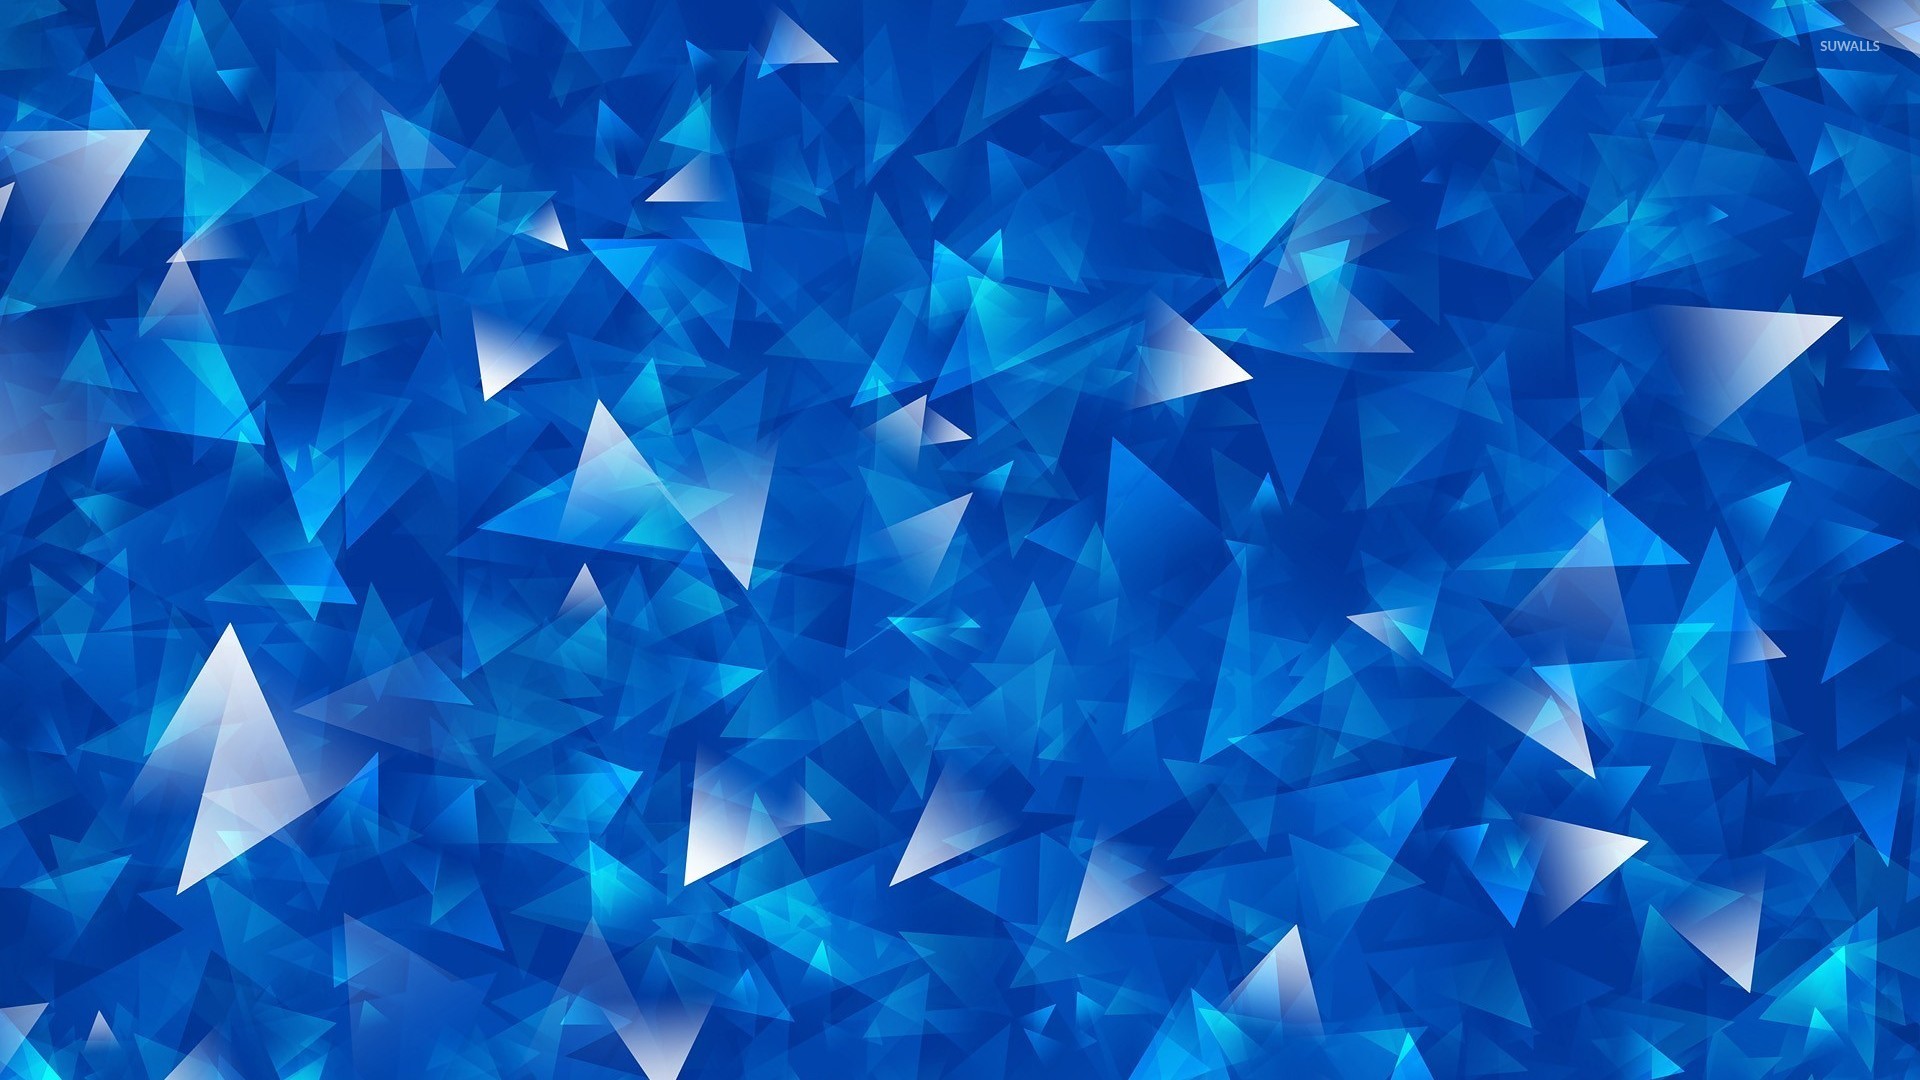 Overlapping blue and silver triangles wallpaper - Abstract wallpapers ...